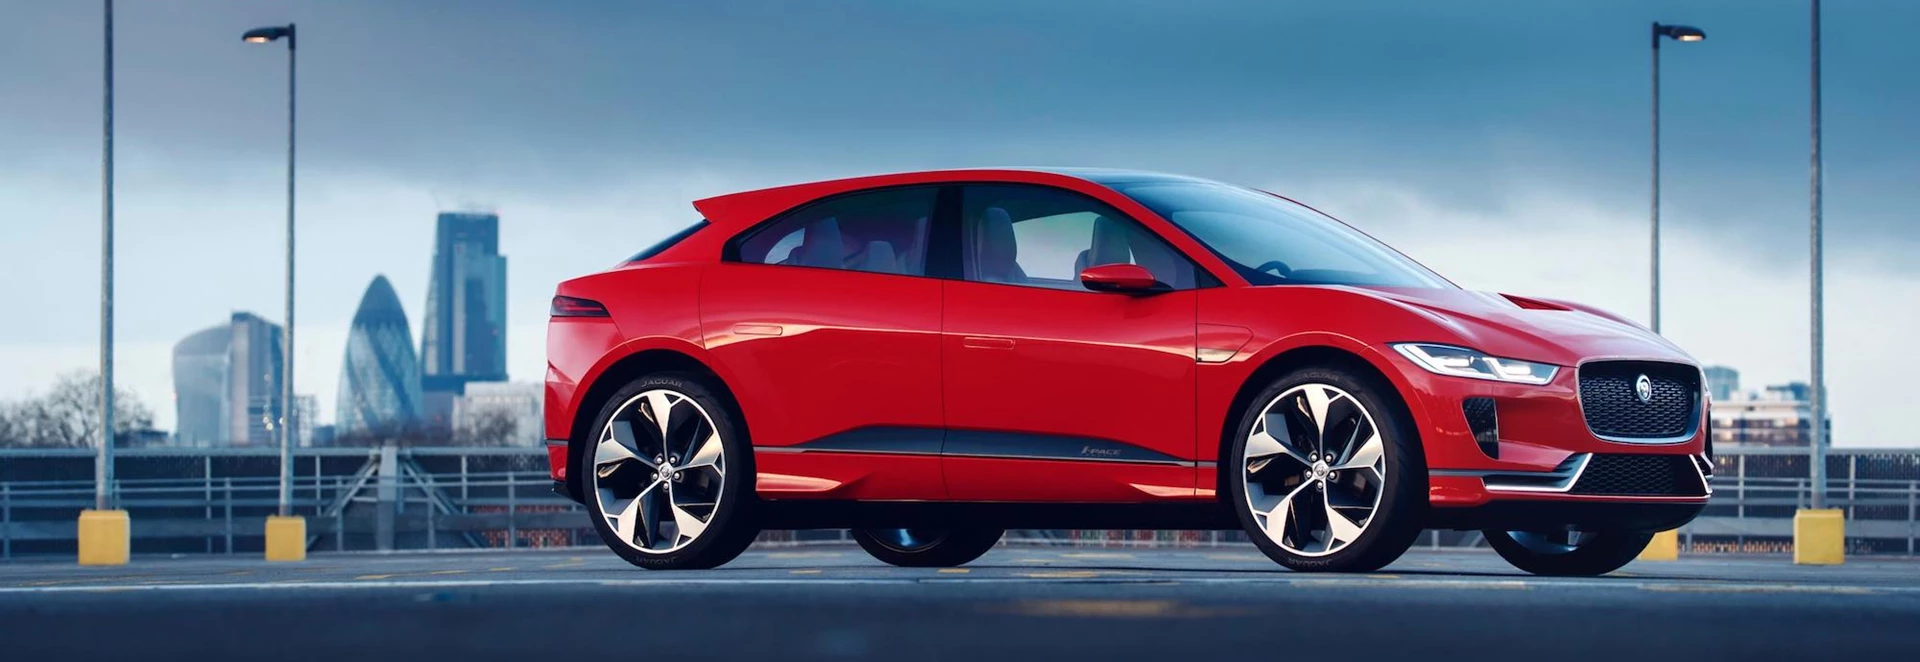 Top 5 affordable electric cars coming in 2020 